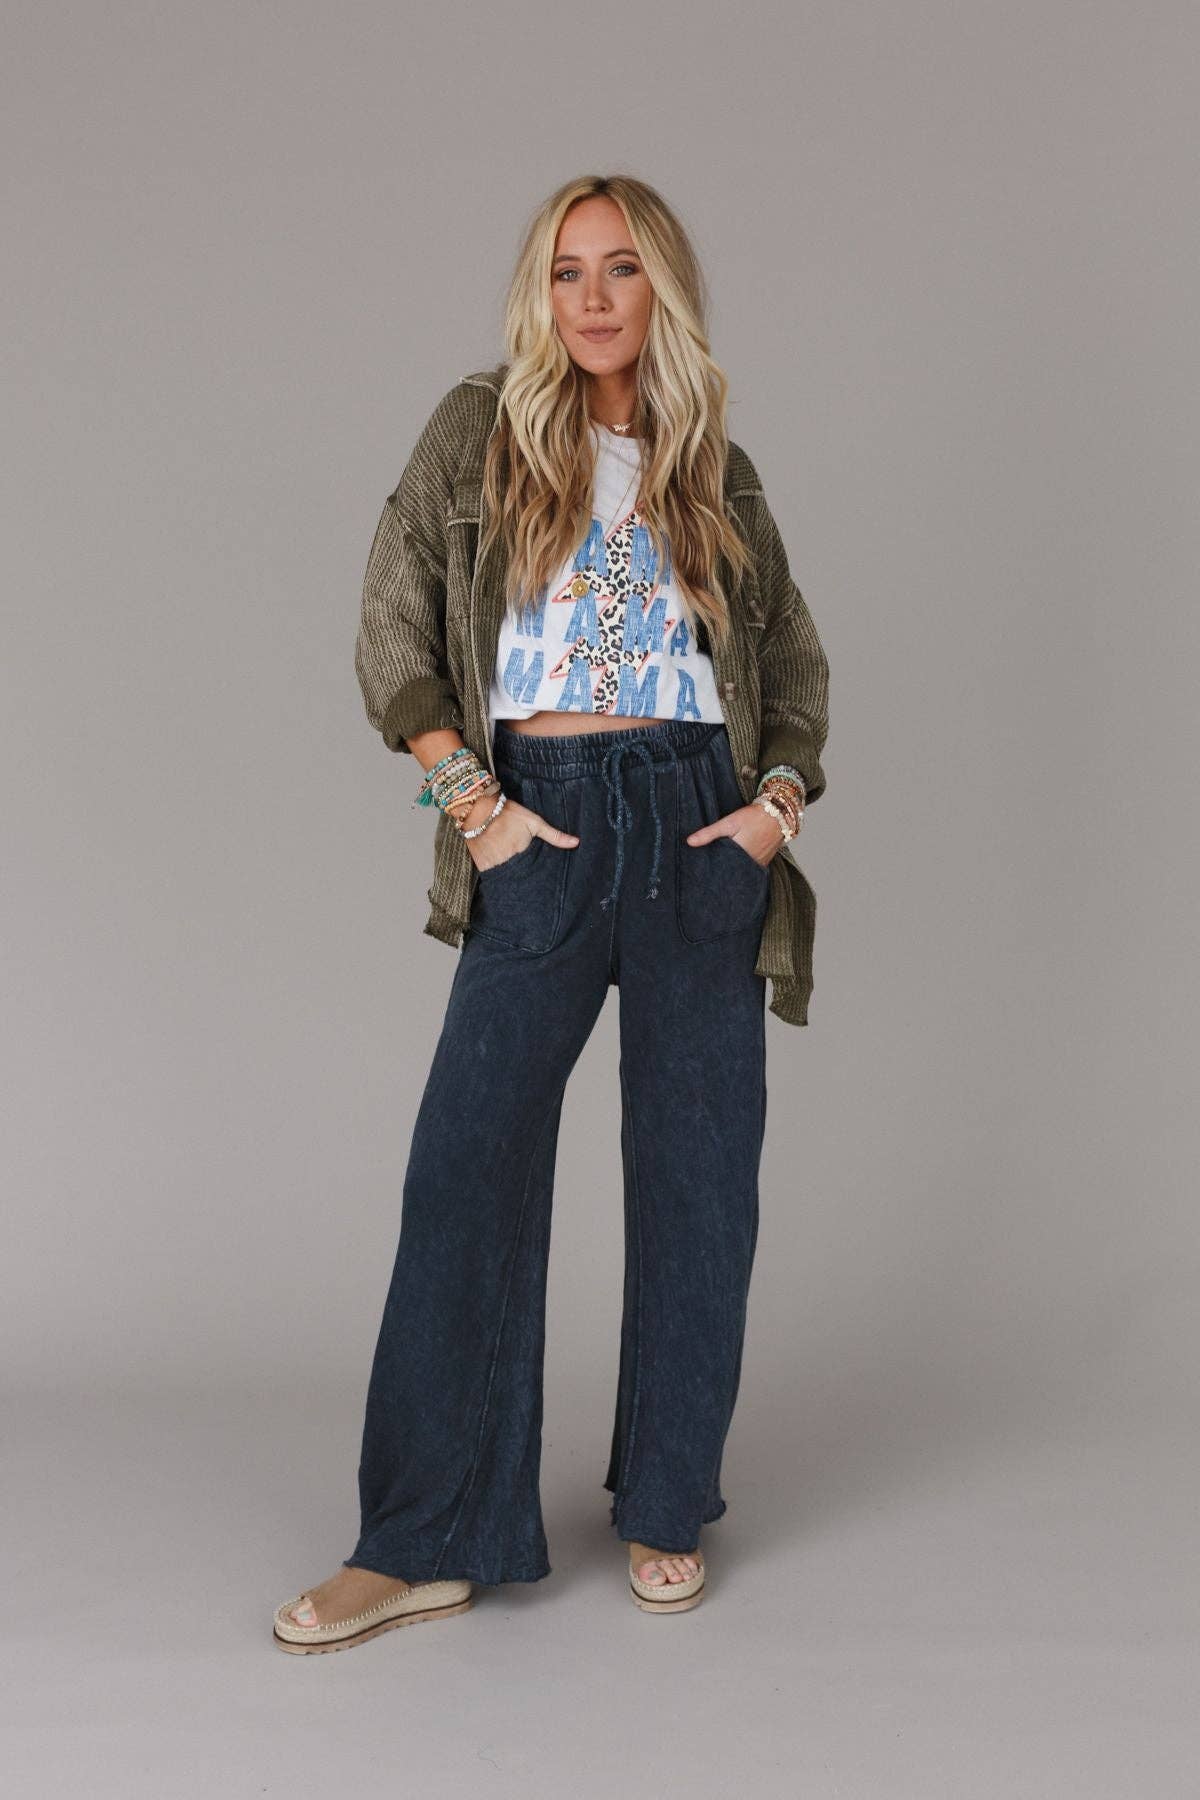 Relaxing Robin Wide Leg Pant - New Navy